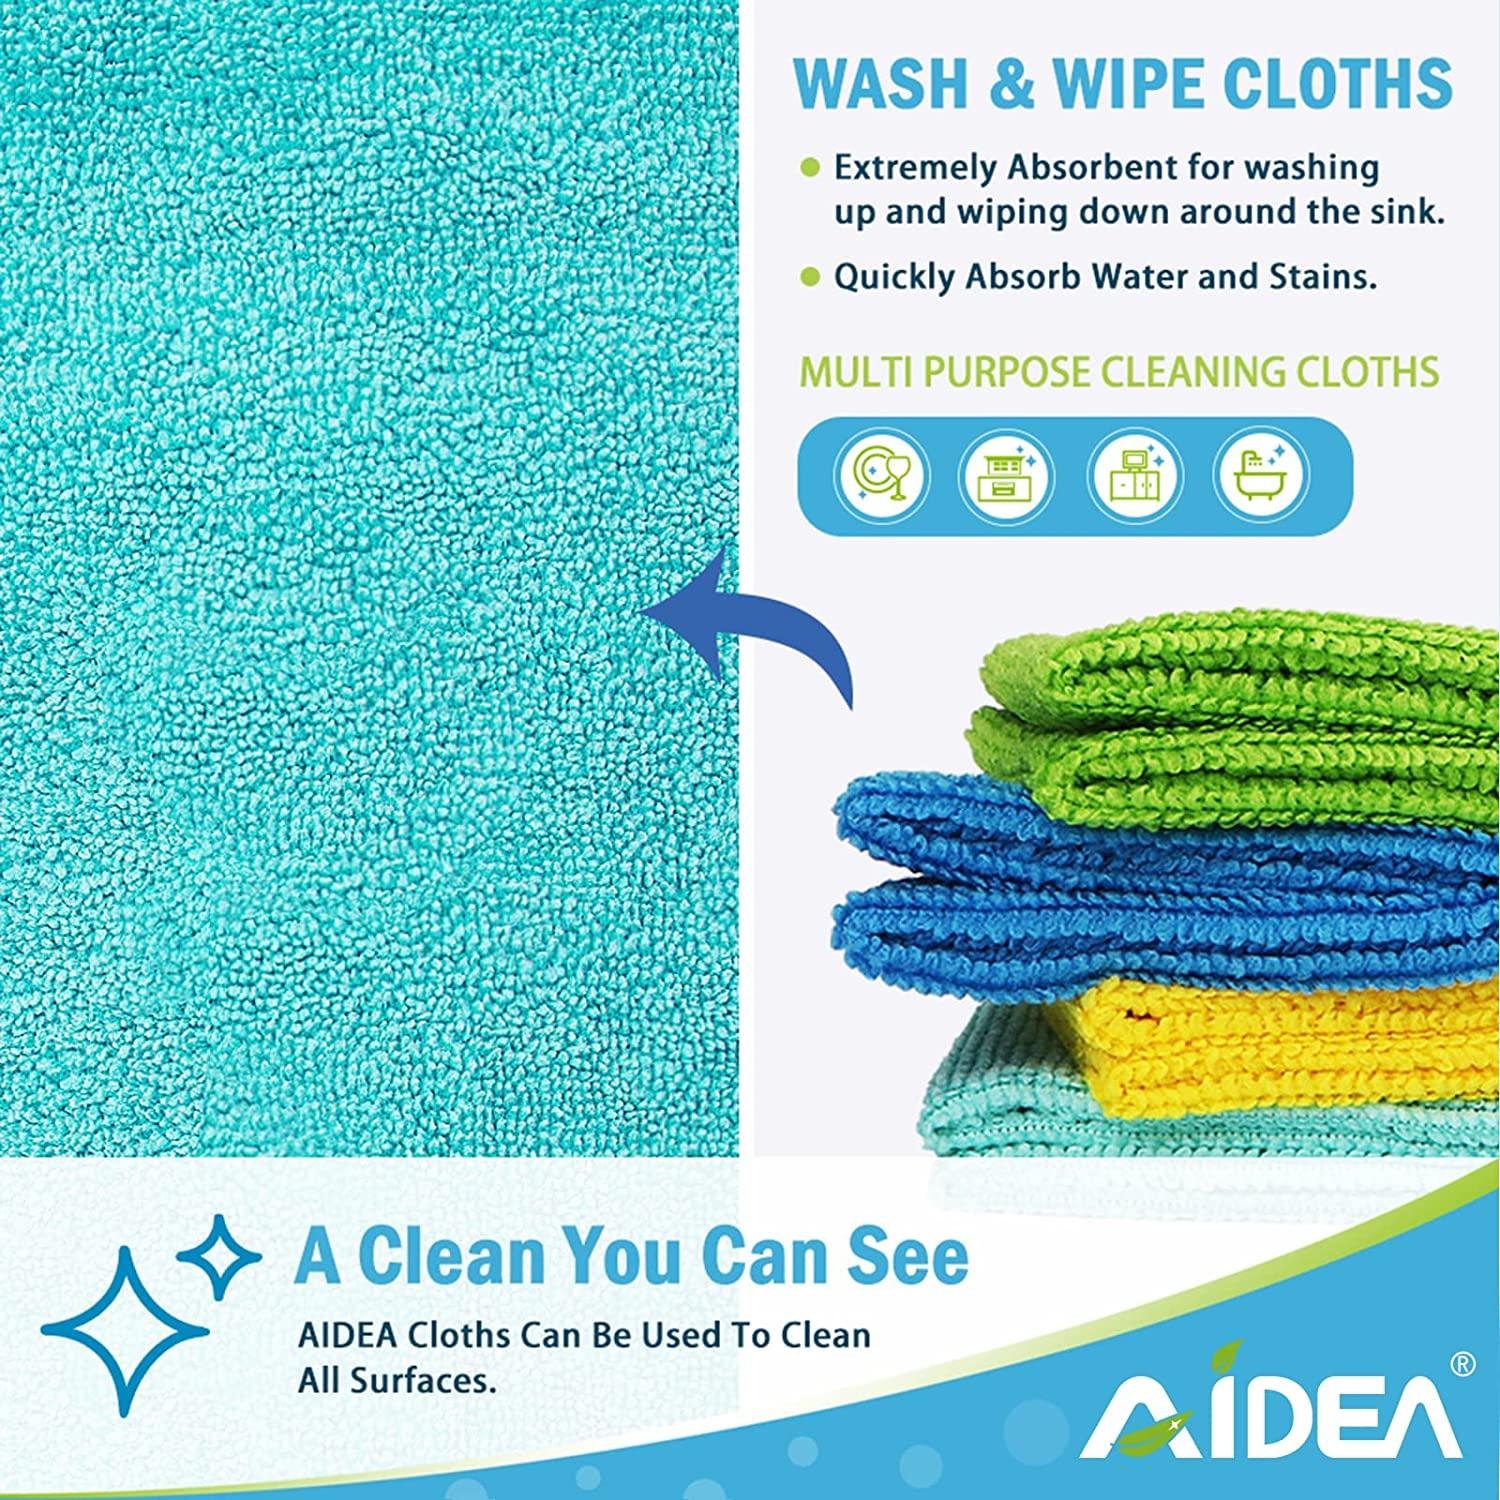 AIDEA Dish Cloth Microfiber-8PK, 12”x12”, Microfiber Cleaning Cloth, Super  Soft and Absorbent, Multi-Purpose Microfiber Dish Rags for